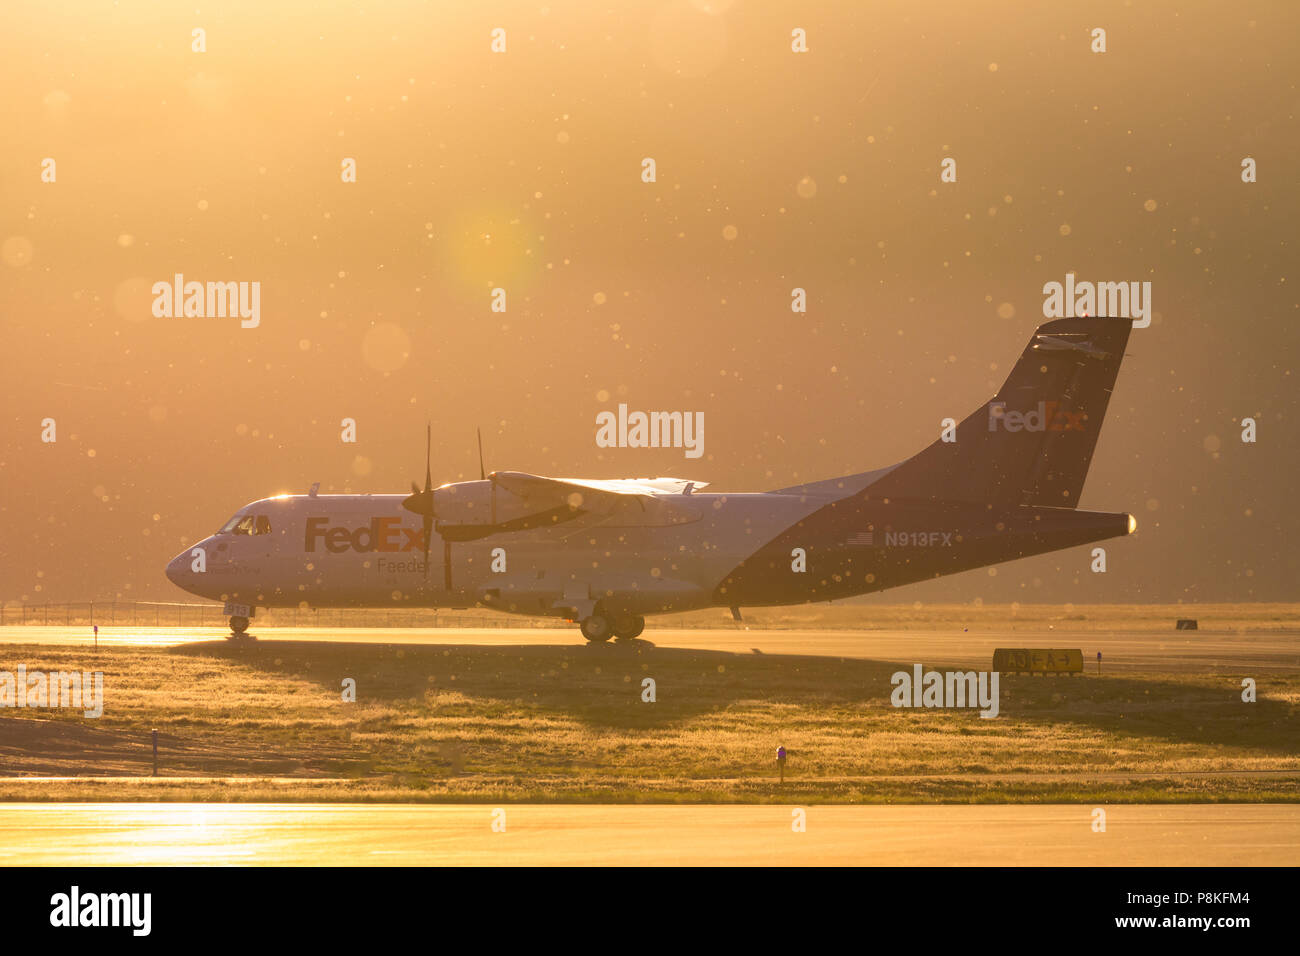 A FedEx Feeder aircraft is taxing out to deliver more packages. Stock Photo